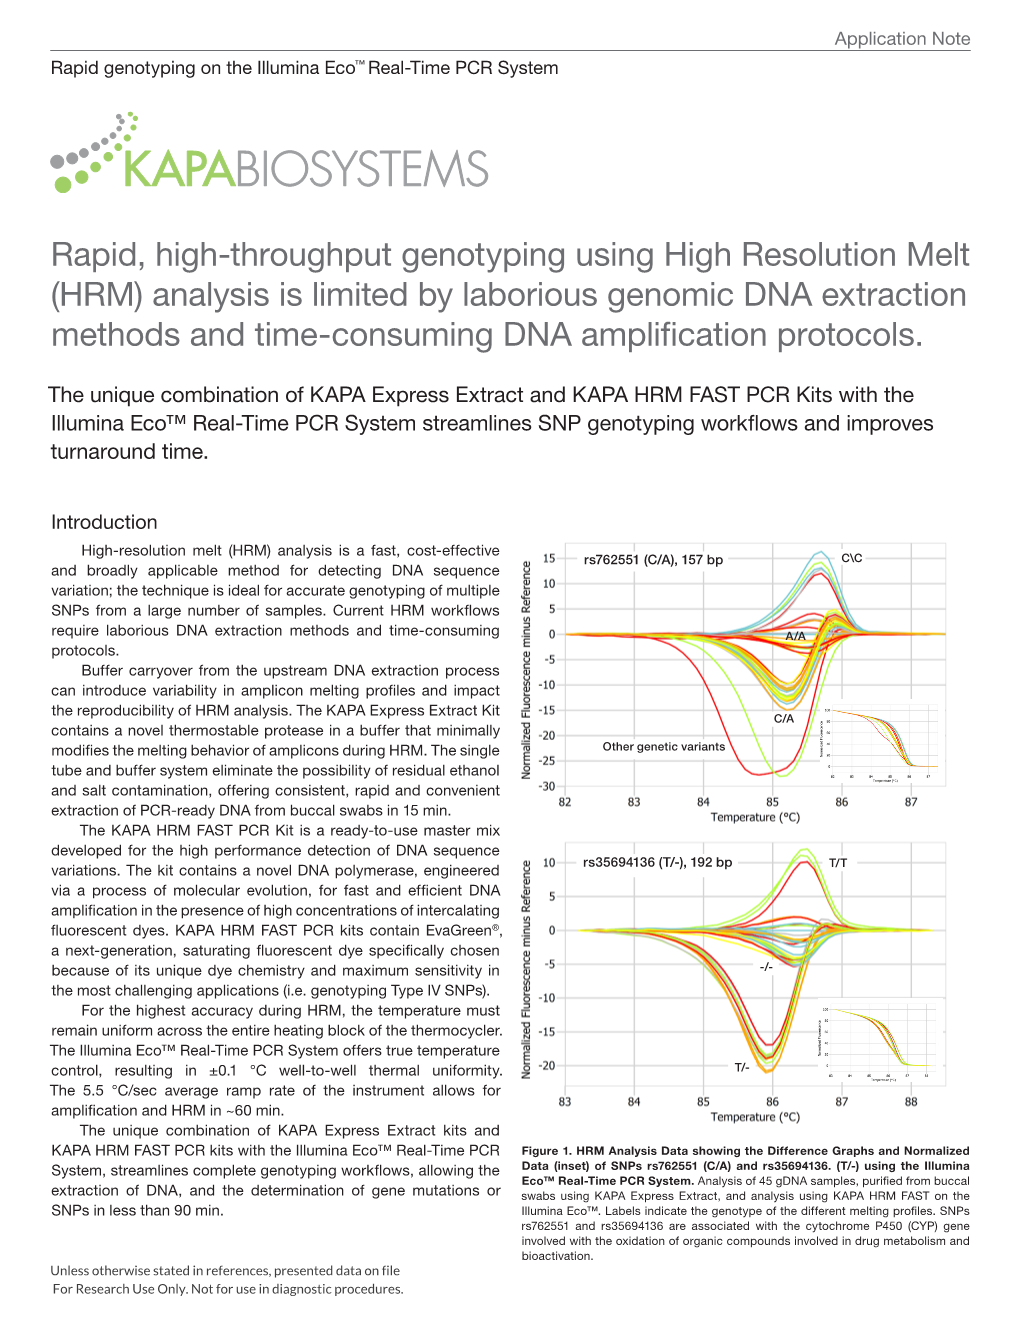 Rapid, High-Throughput Genotyping Using High Resolution Melt (HRM) Analysis Is Limited by Laborious Genomic DNA Extraction Metho